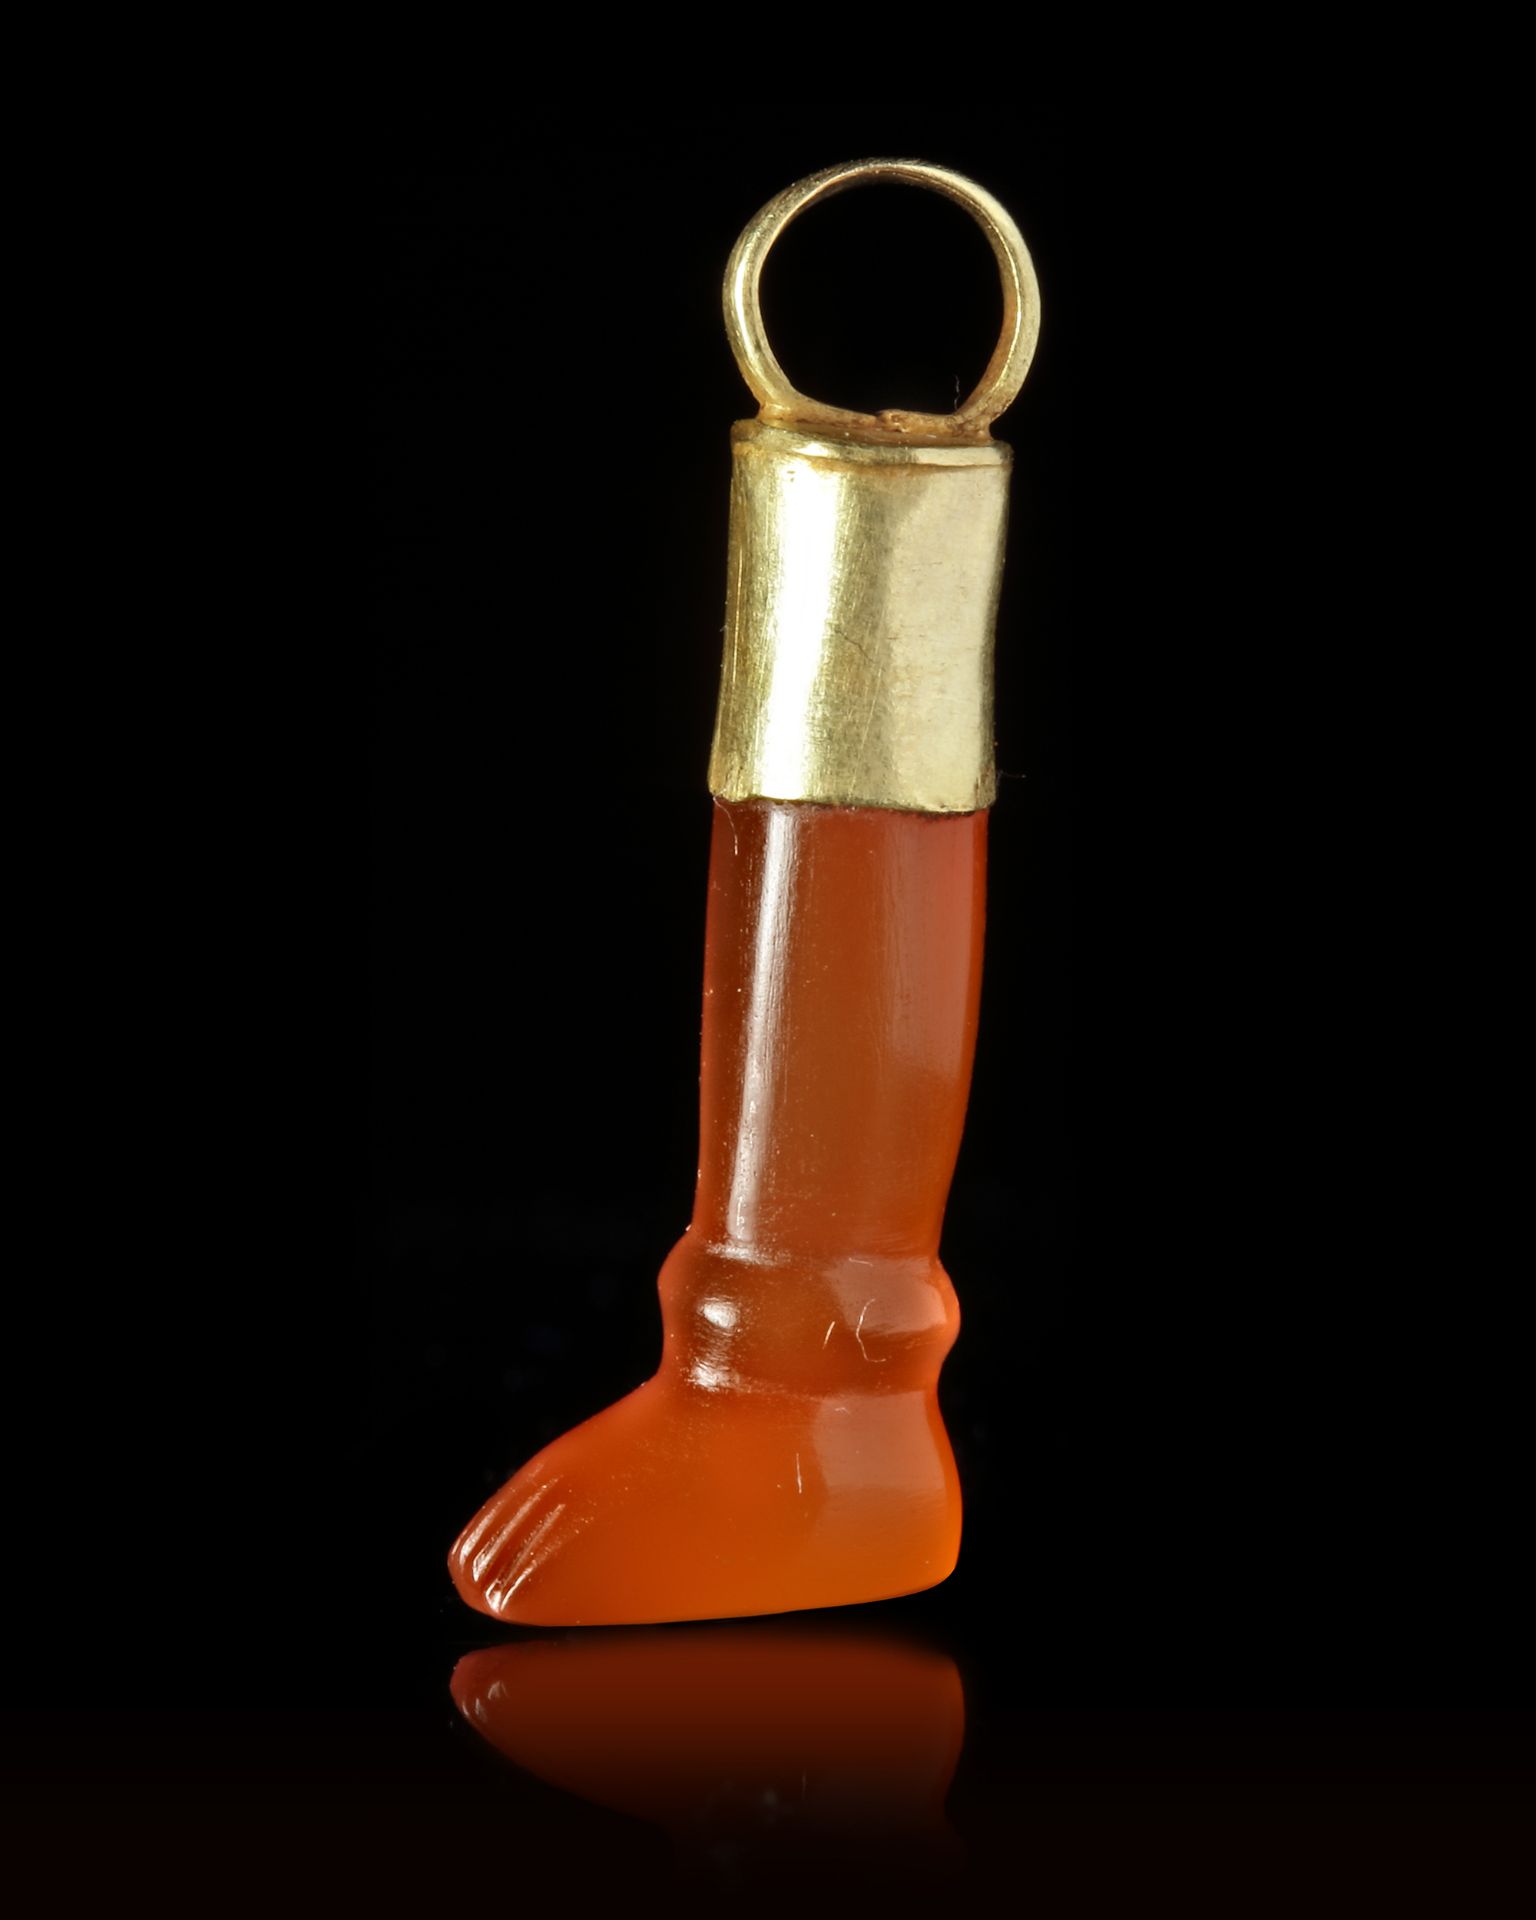 A CARNELIAN AMULET/SEAL IN THE SHAPE OF A LEG, CIRCA 700 BC